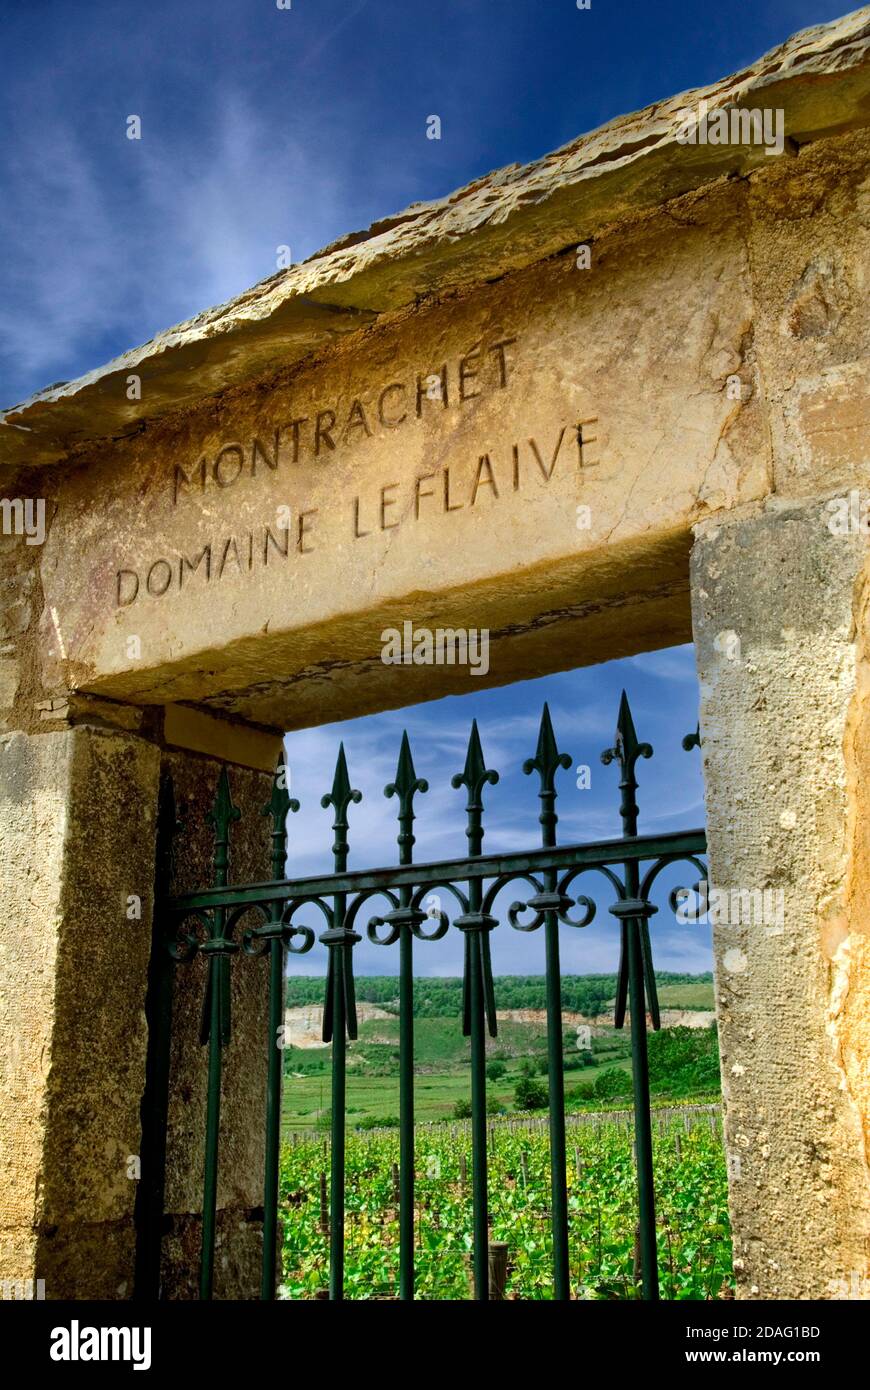 DOMAINE LEFLAIVE GRAND CRU VINEYARD Stone entrance to Domaine Leflaive revered 'LE MONTRACHET' Burgundy estate in Puligny-Montrachet Cote d'Or France Stock Photo